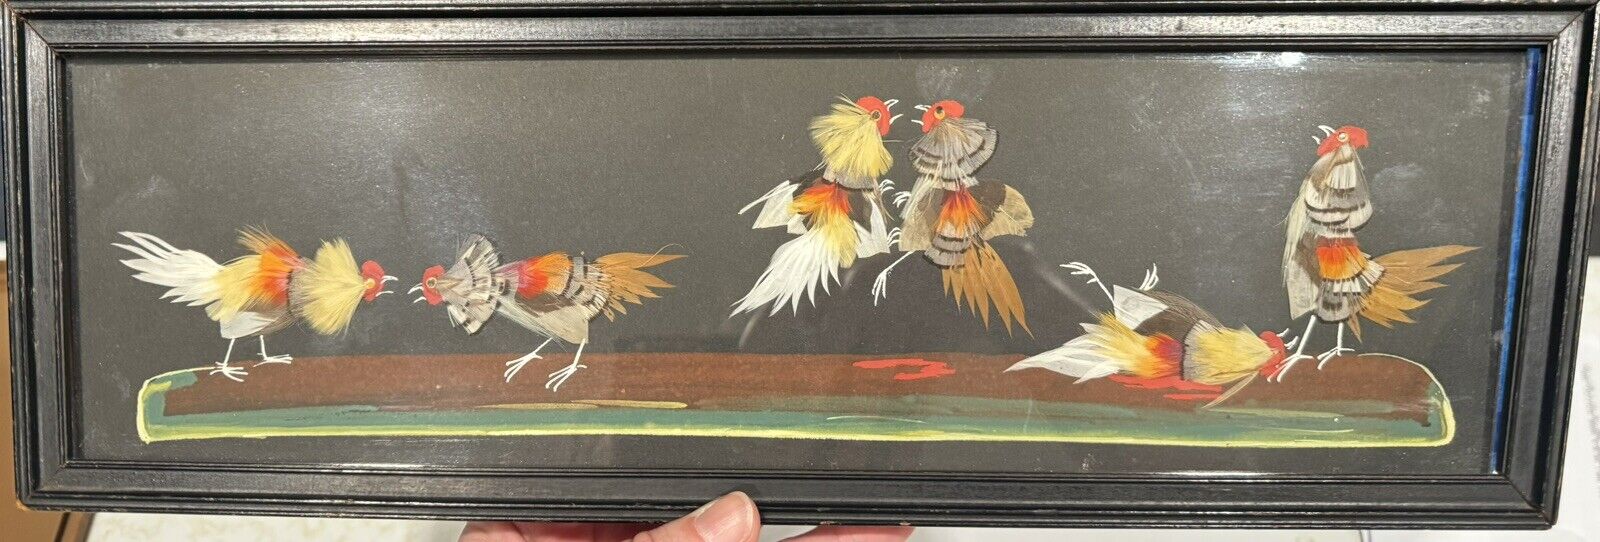 Folk Art Rooster Cock Fight Framed Picture Real Feathers And Painting Vintage